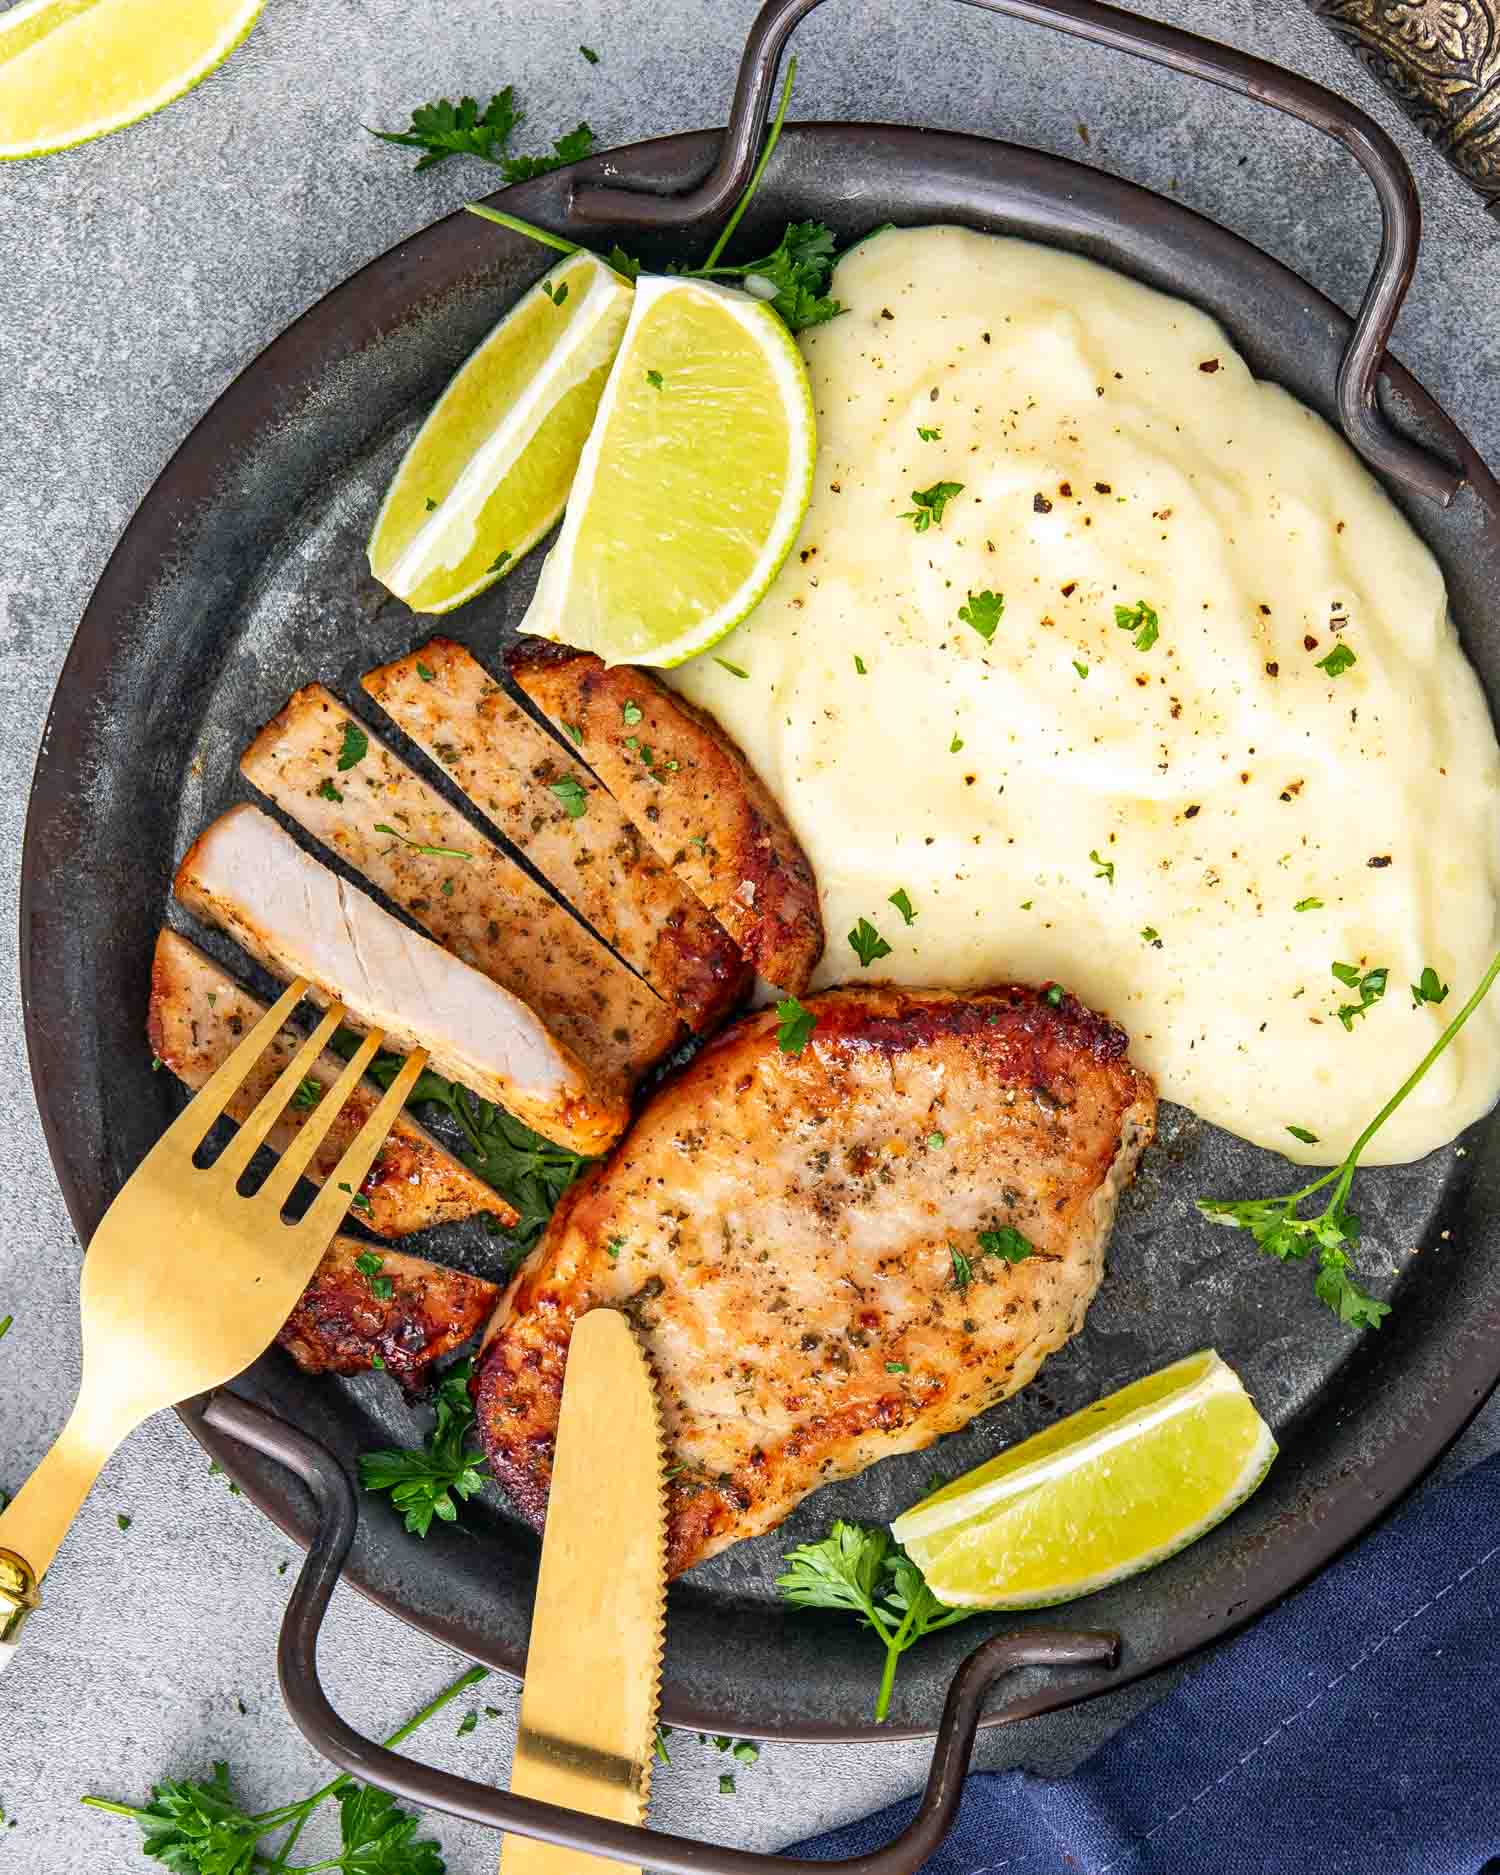 2 ranch pork chops on a plate along some mashed potatoes and garnished with lemon wedges and parsley.